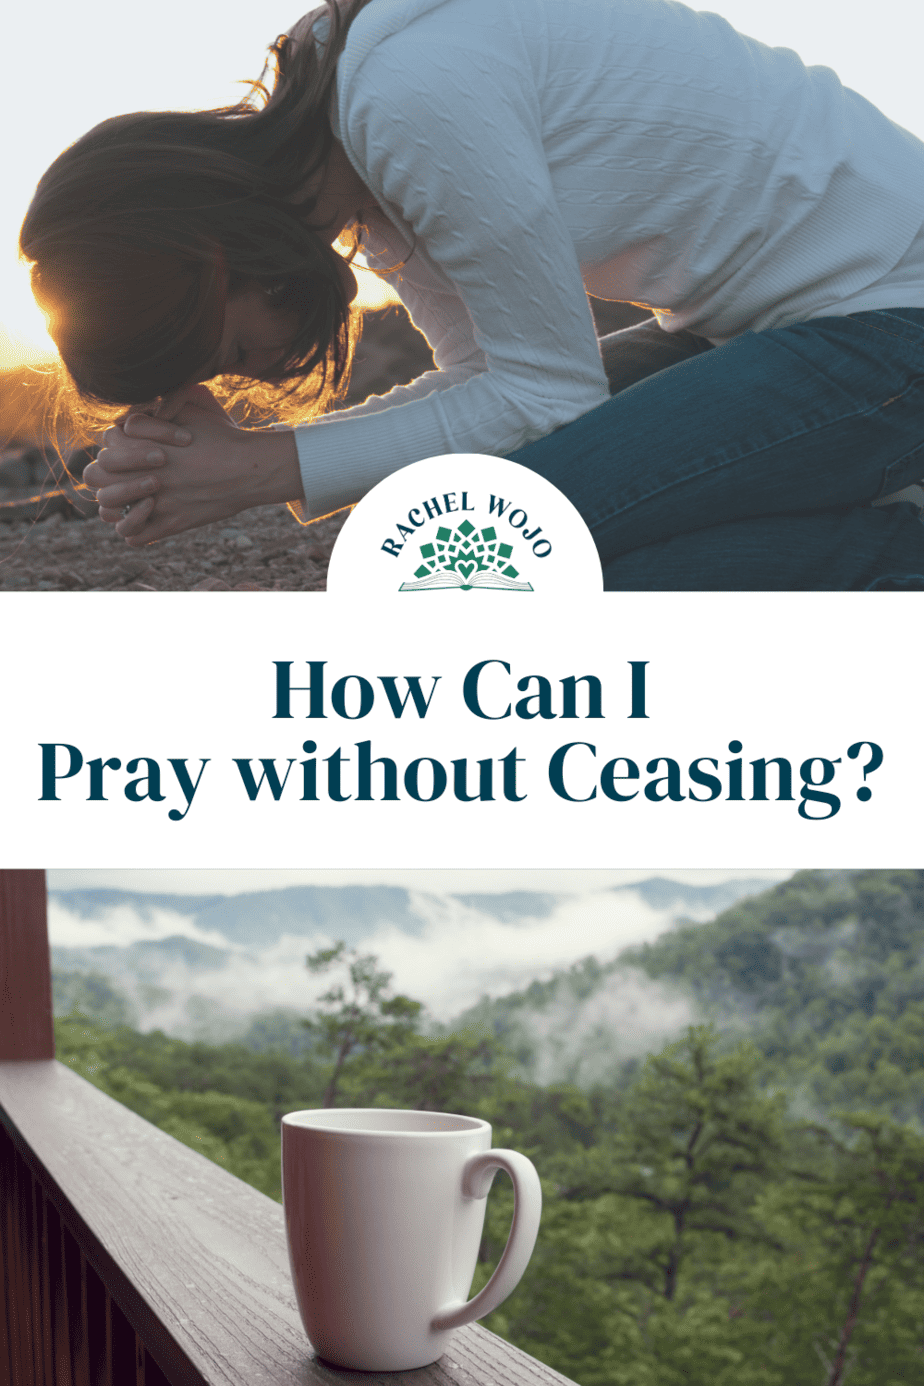 How Do I Pray without Ceasing?